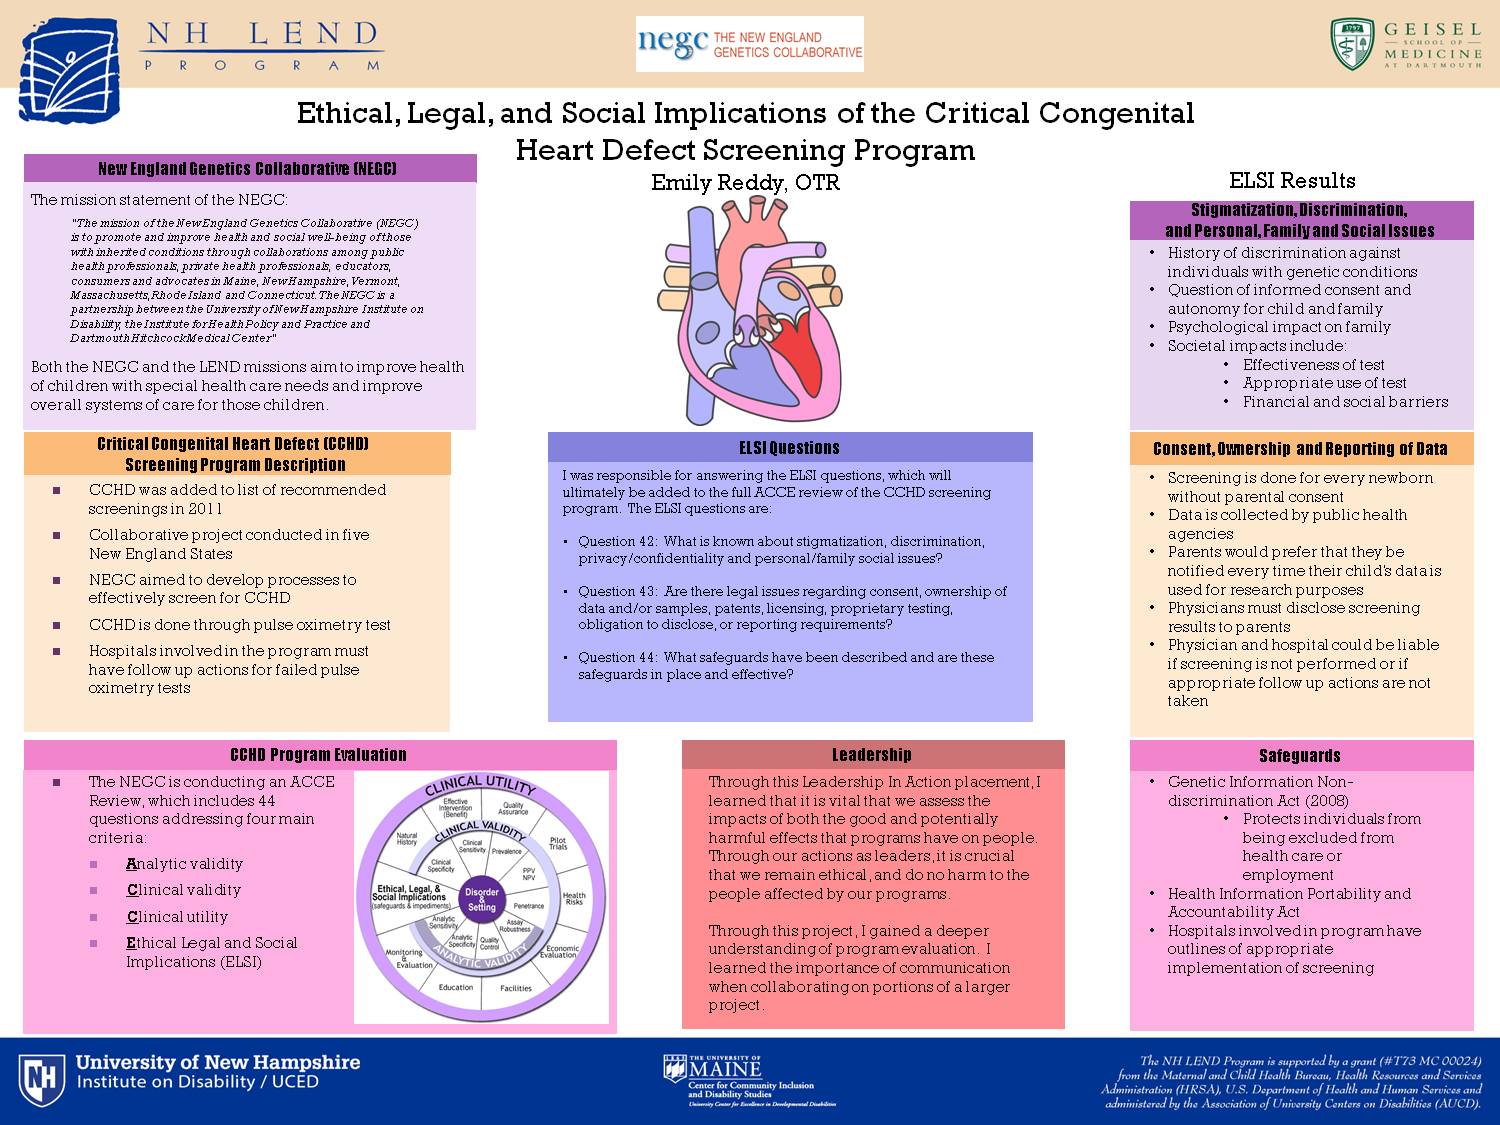 Ethical, Legal, And Social Implications Of The Critical Congenital Heart Defect Screening Program by efj9